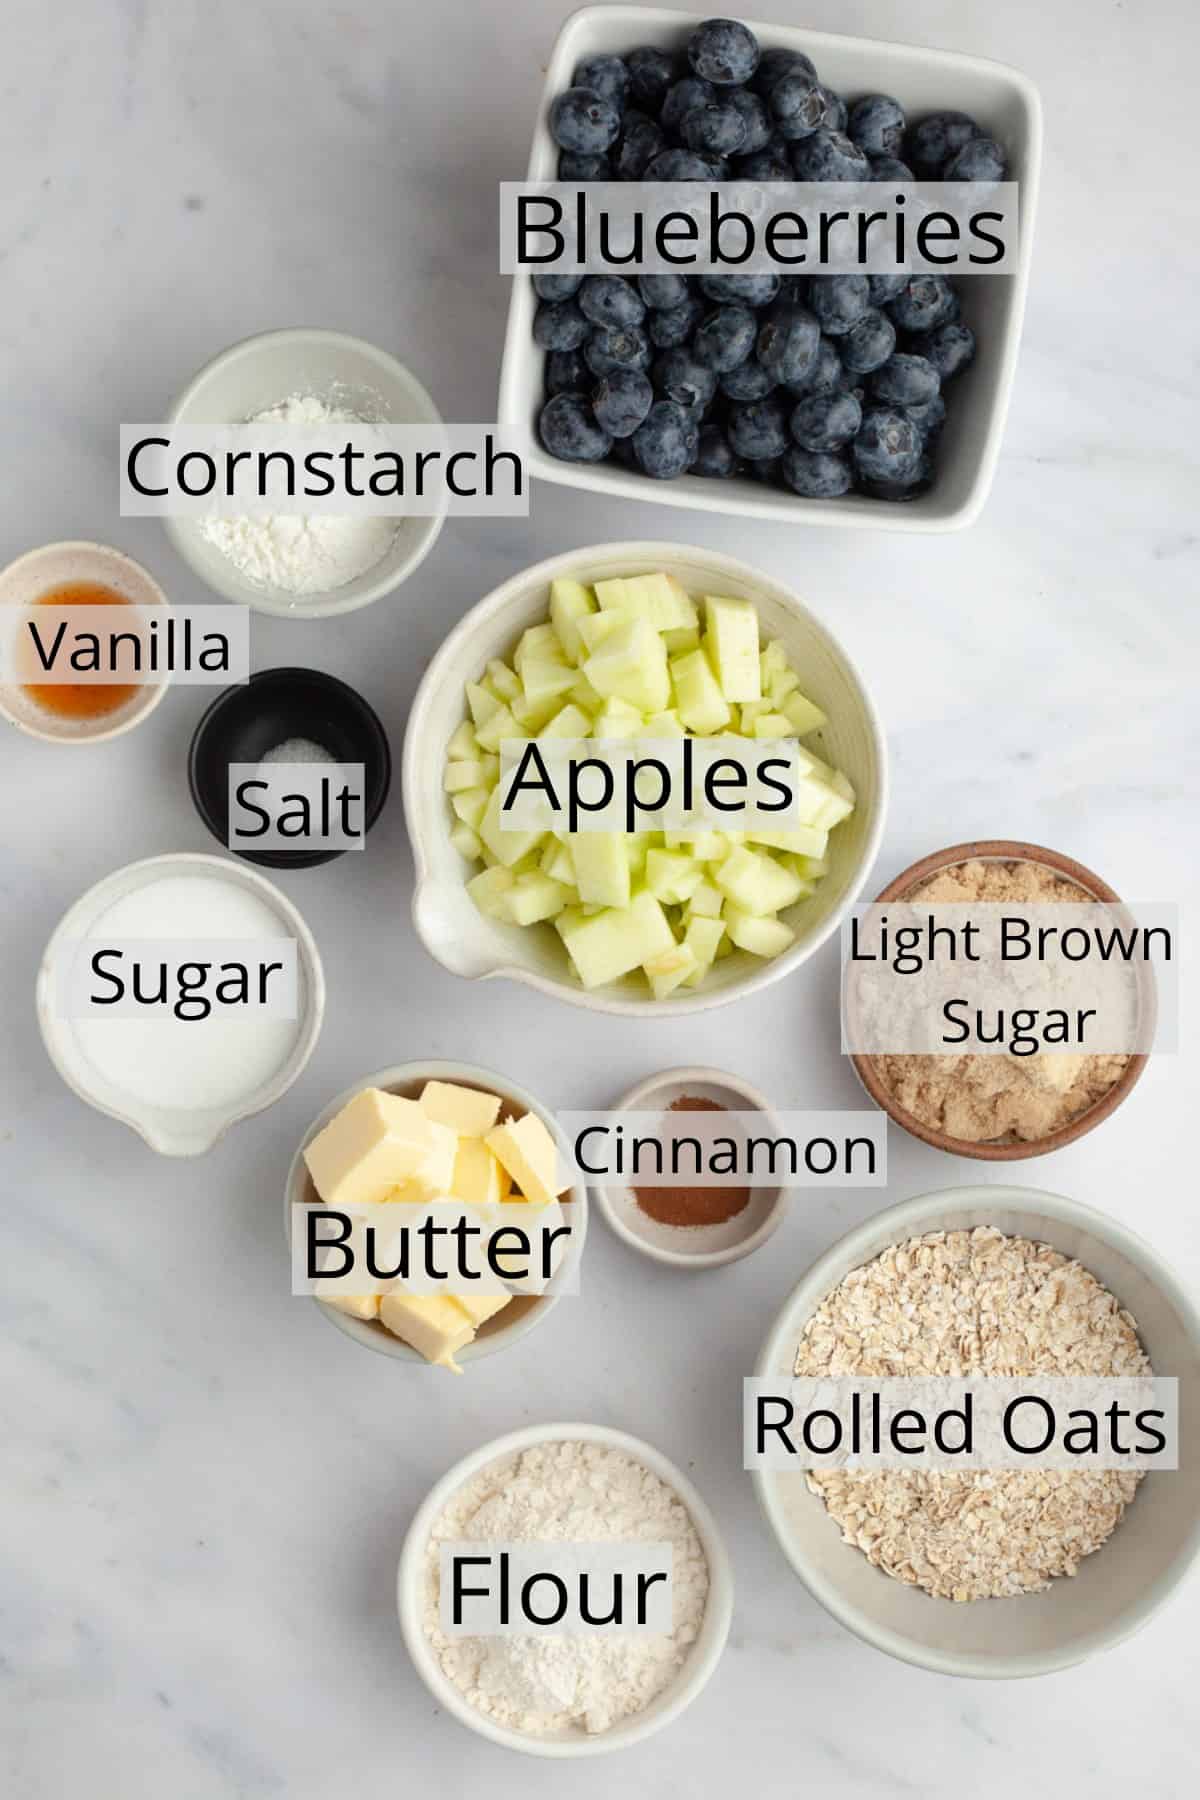 All the ingredients needed to make apple and blueberry crumble, weighed out into small bowls.